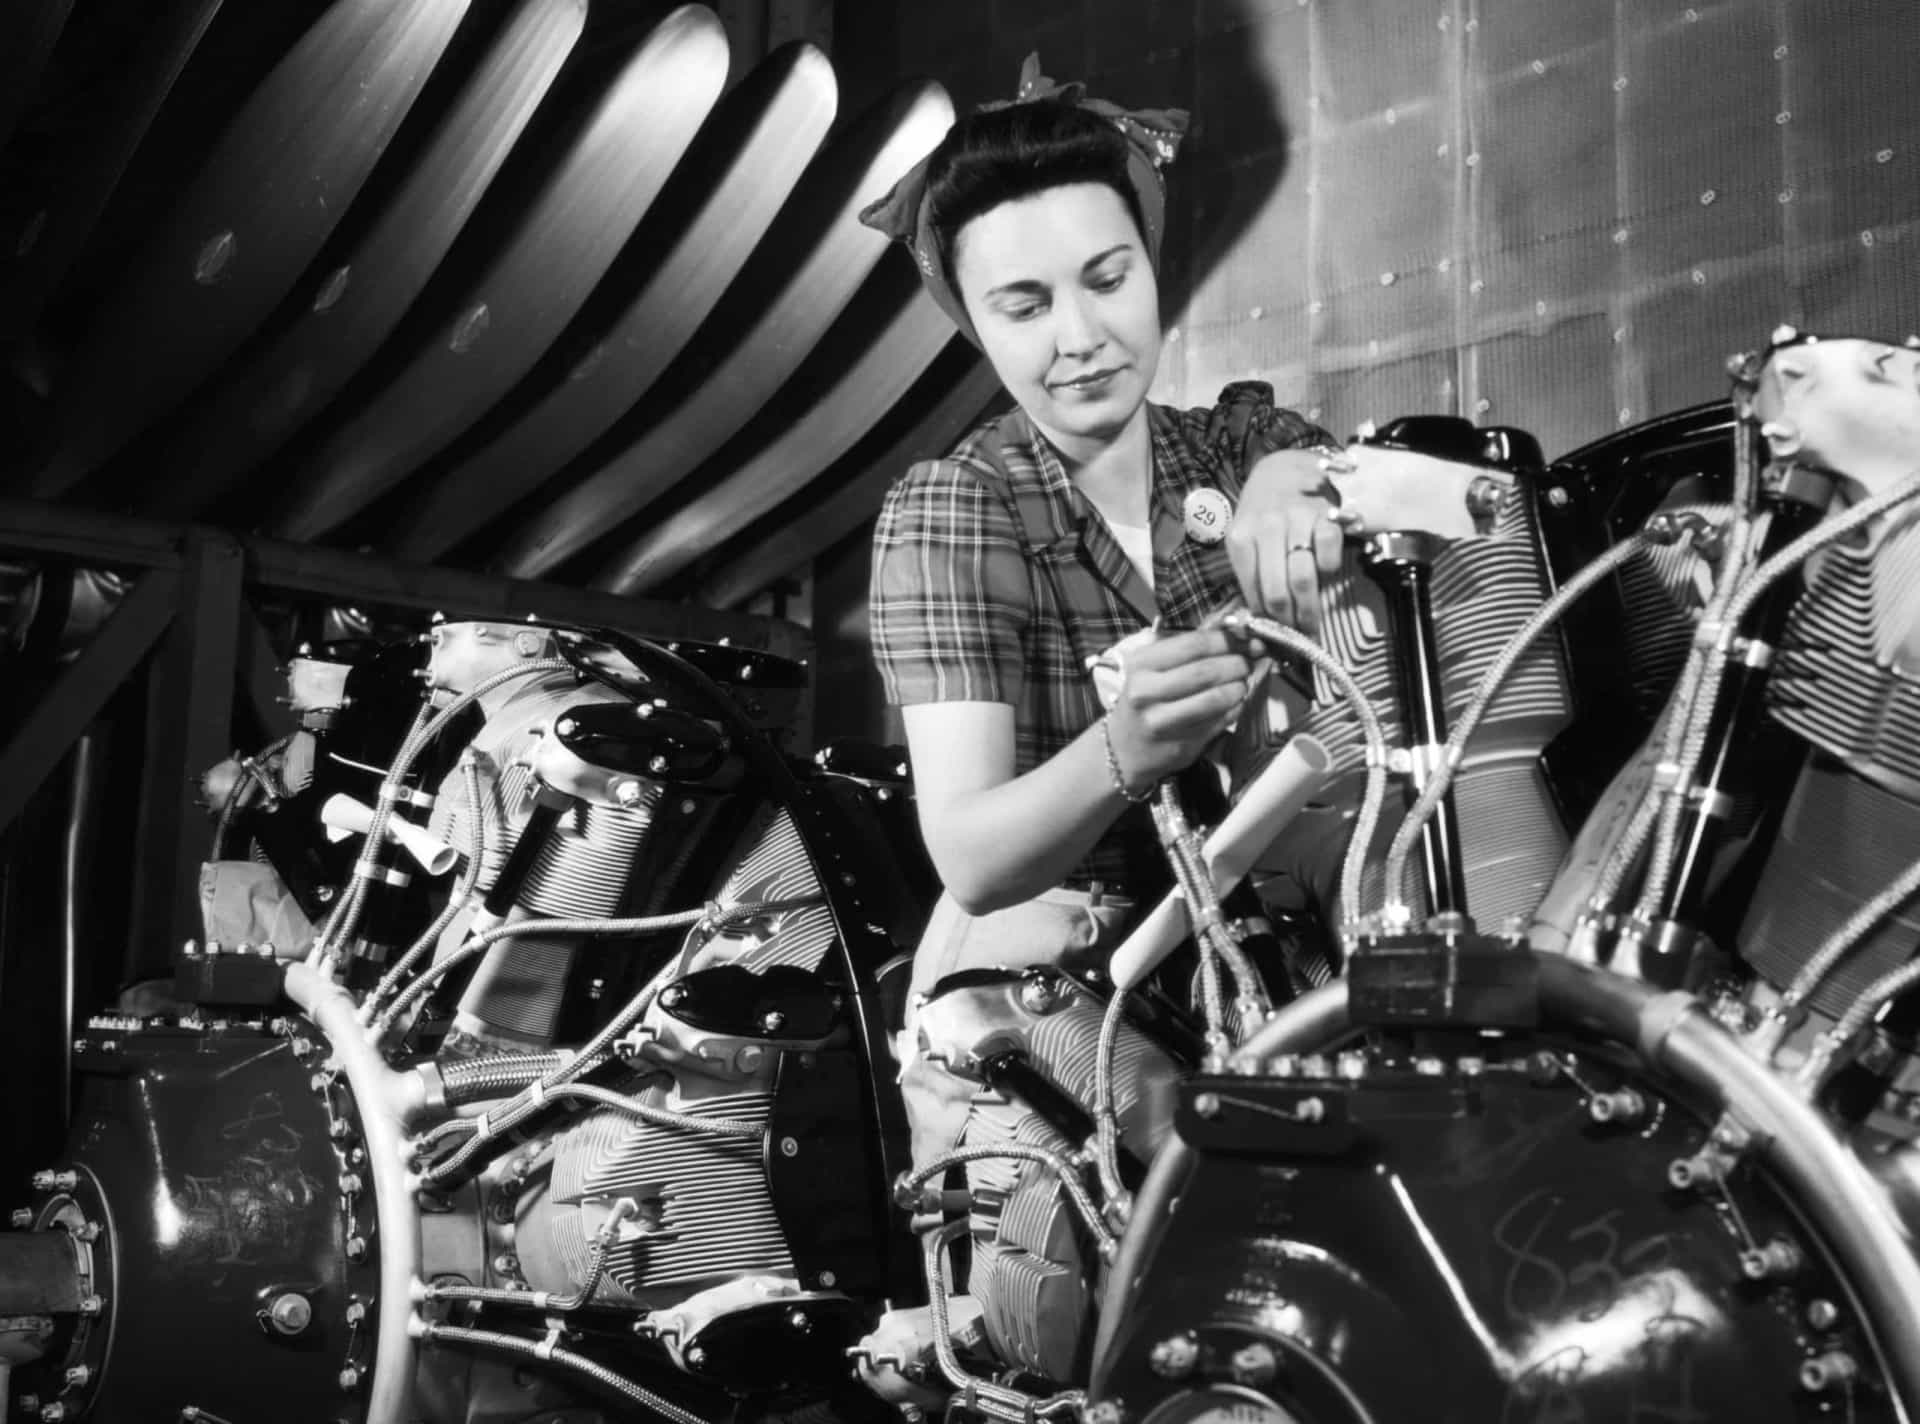 <p>A woman concentrates on her job working on an engine at the North American Aviation (NAA) plant in California. NAA designed and built some of the most iconic aircraft of the Second World War, including the P-51 Mustang fighter and the B-25 Mitchell bomber.</p><p><a href="https://www.msn.com/en-us/community/channel/vid-7xx8mnucu55yw63we9va2gwr7uihbxwc68fxqp25x6tg4ftibpra?cvid=94631541bc0f4f89bfd59158d696ad7e">Follow us and access great exclusive content everyday</a></p>